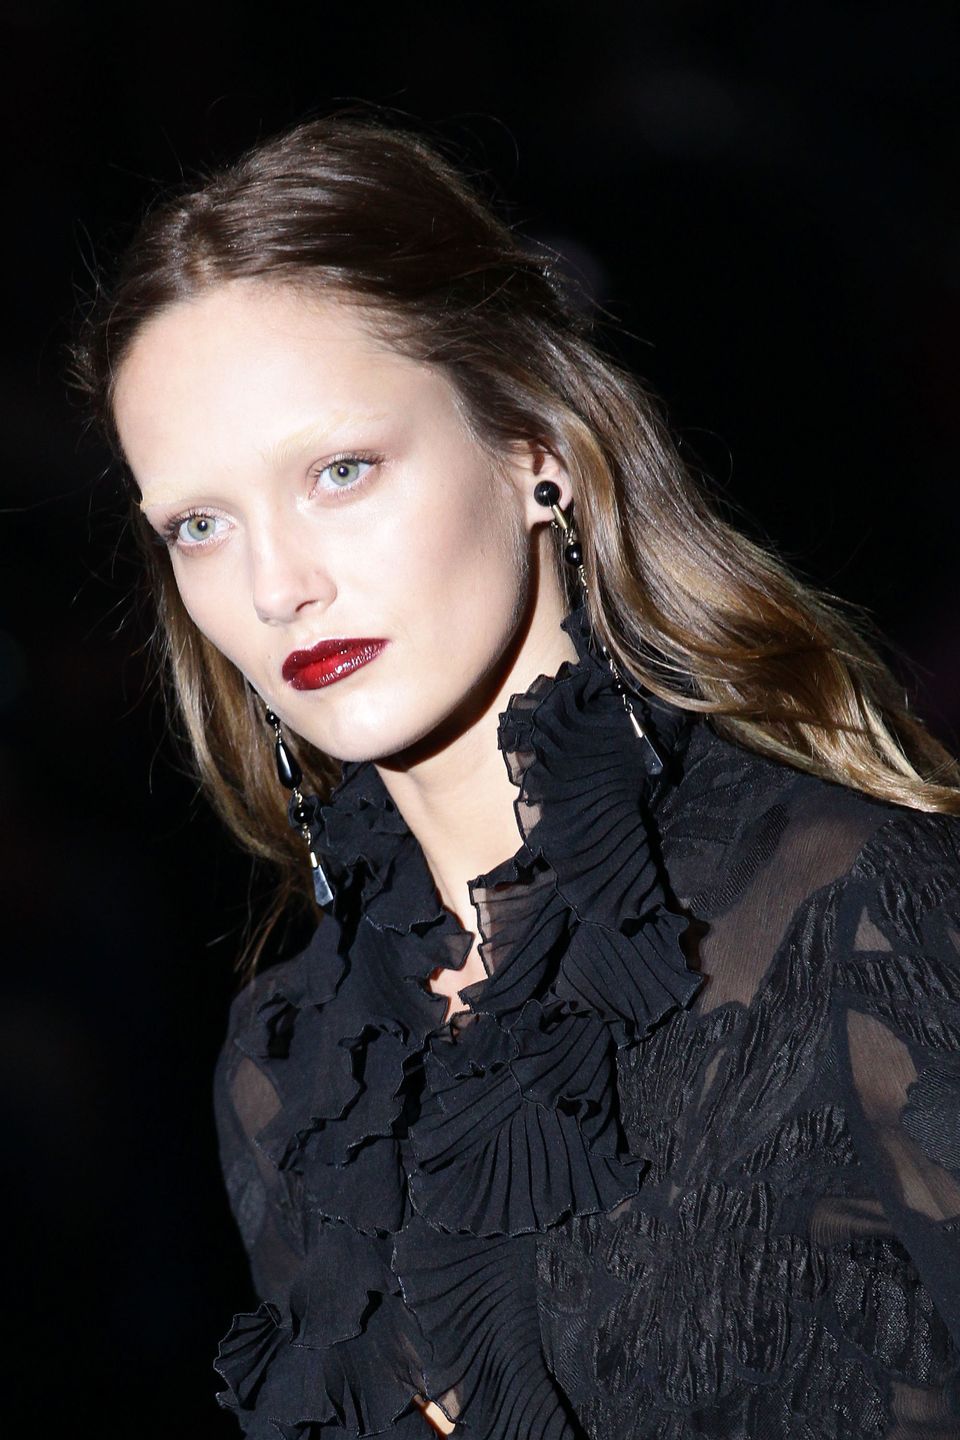 The Best Jewelry For Fall 2012, From Stunning Statement Necklaces To ...